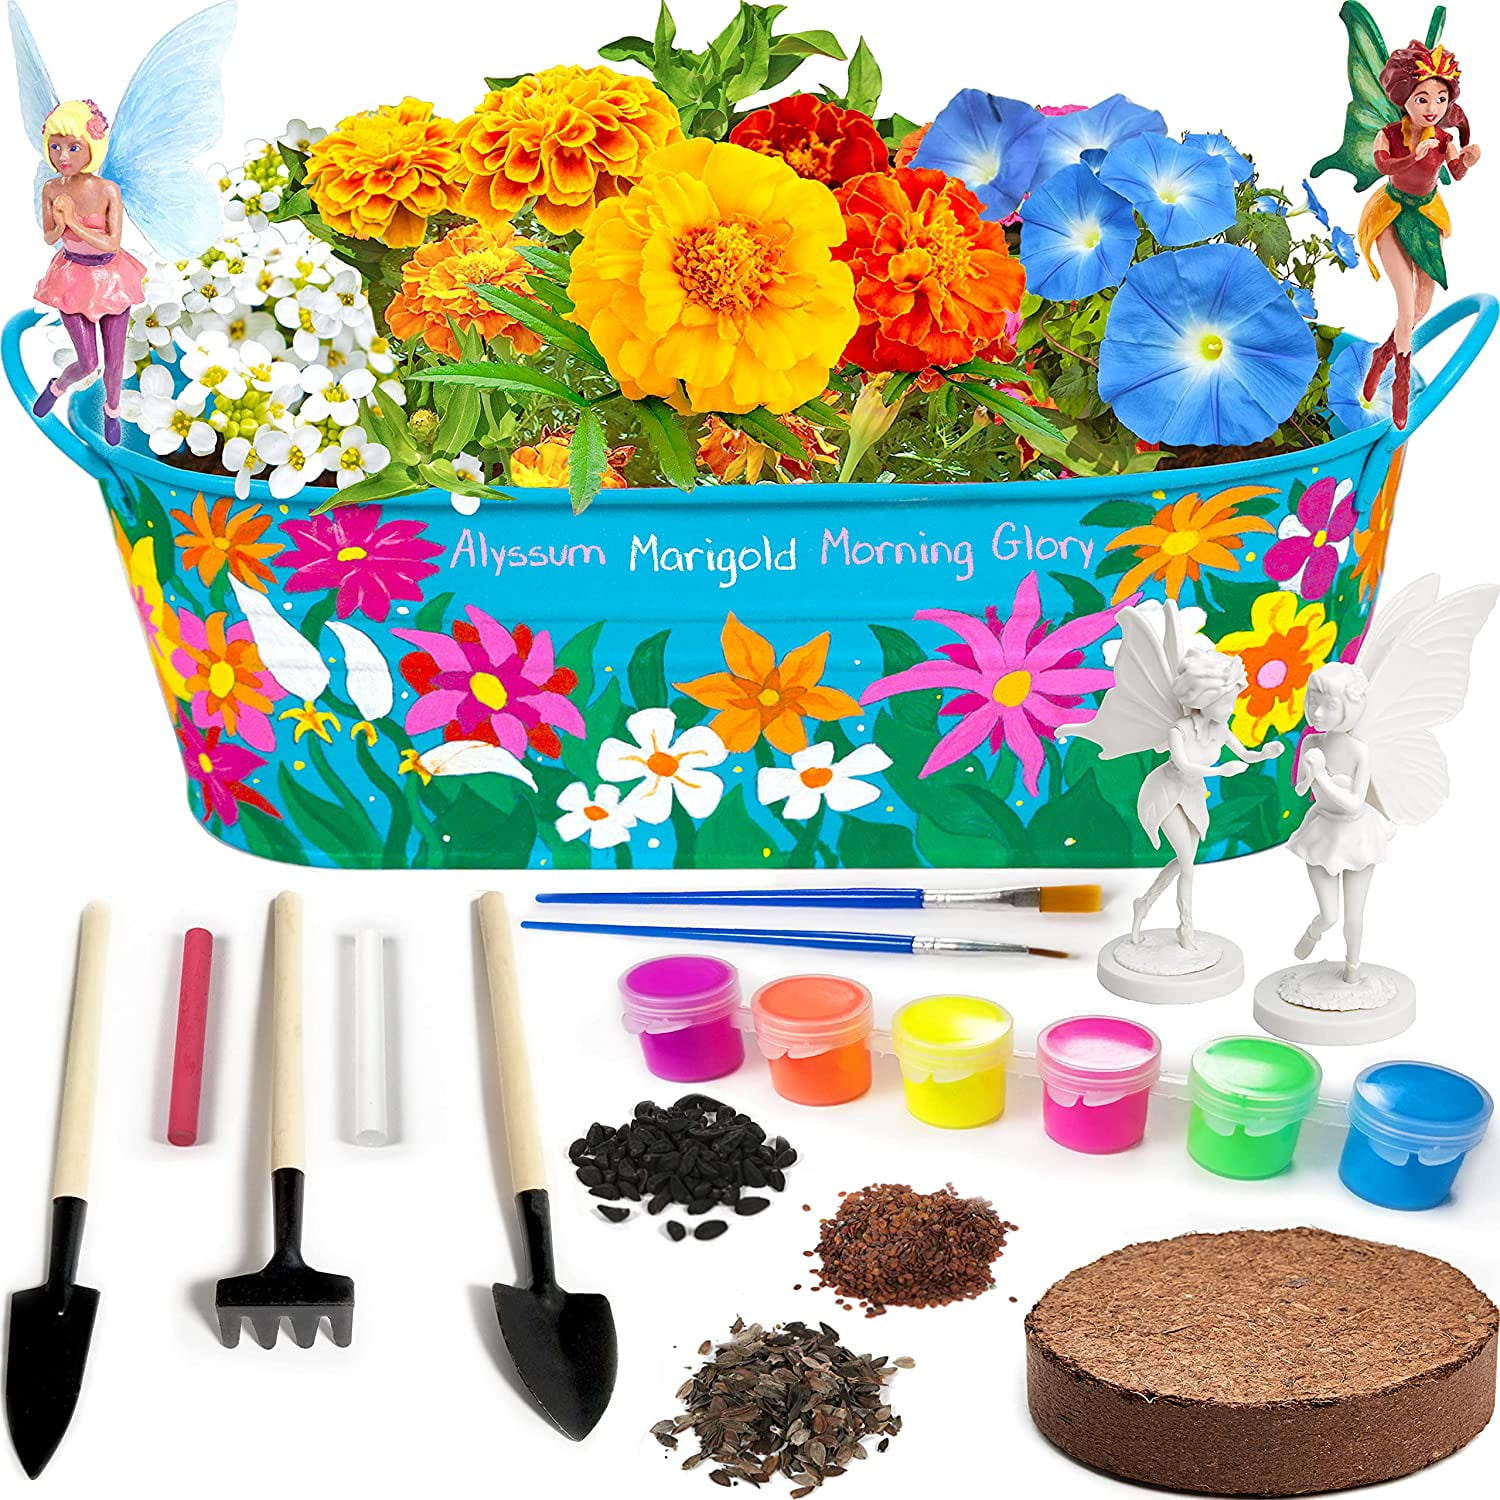 Garden Pot Craft Kit, DIY Craft Kits For Kids, Mother's Day Gifts -12 Pieces